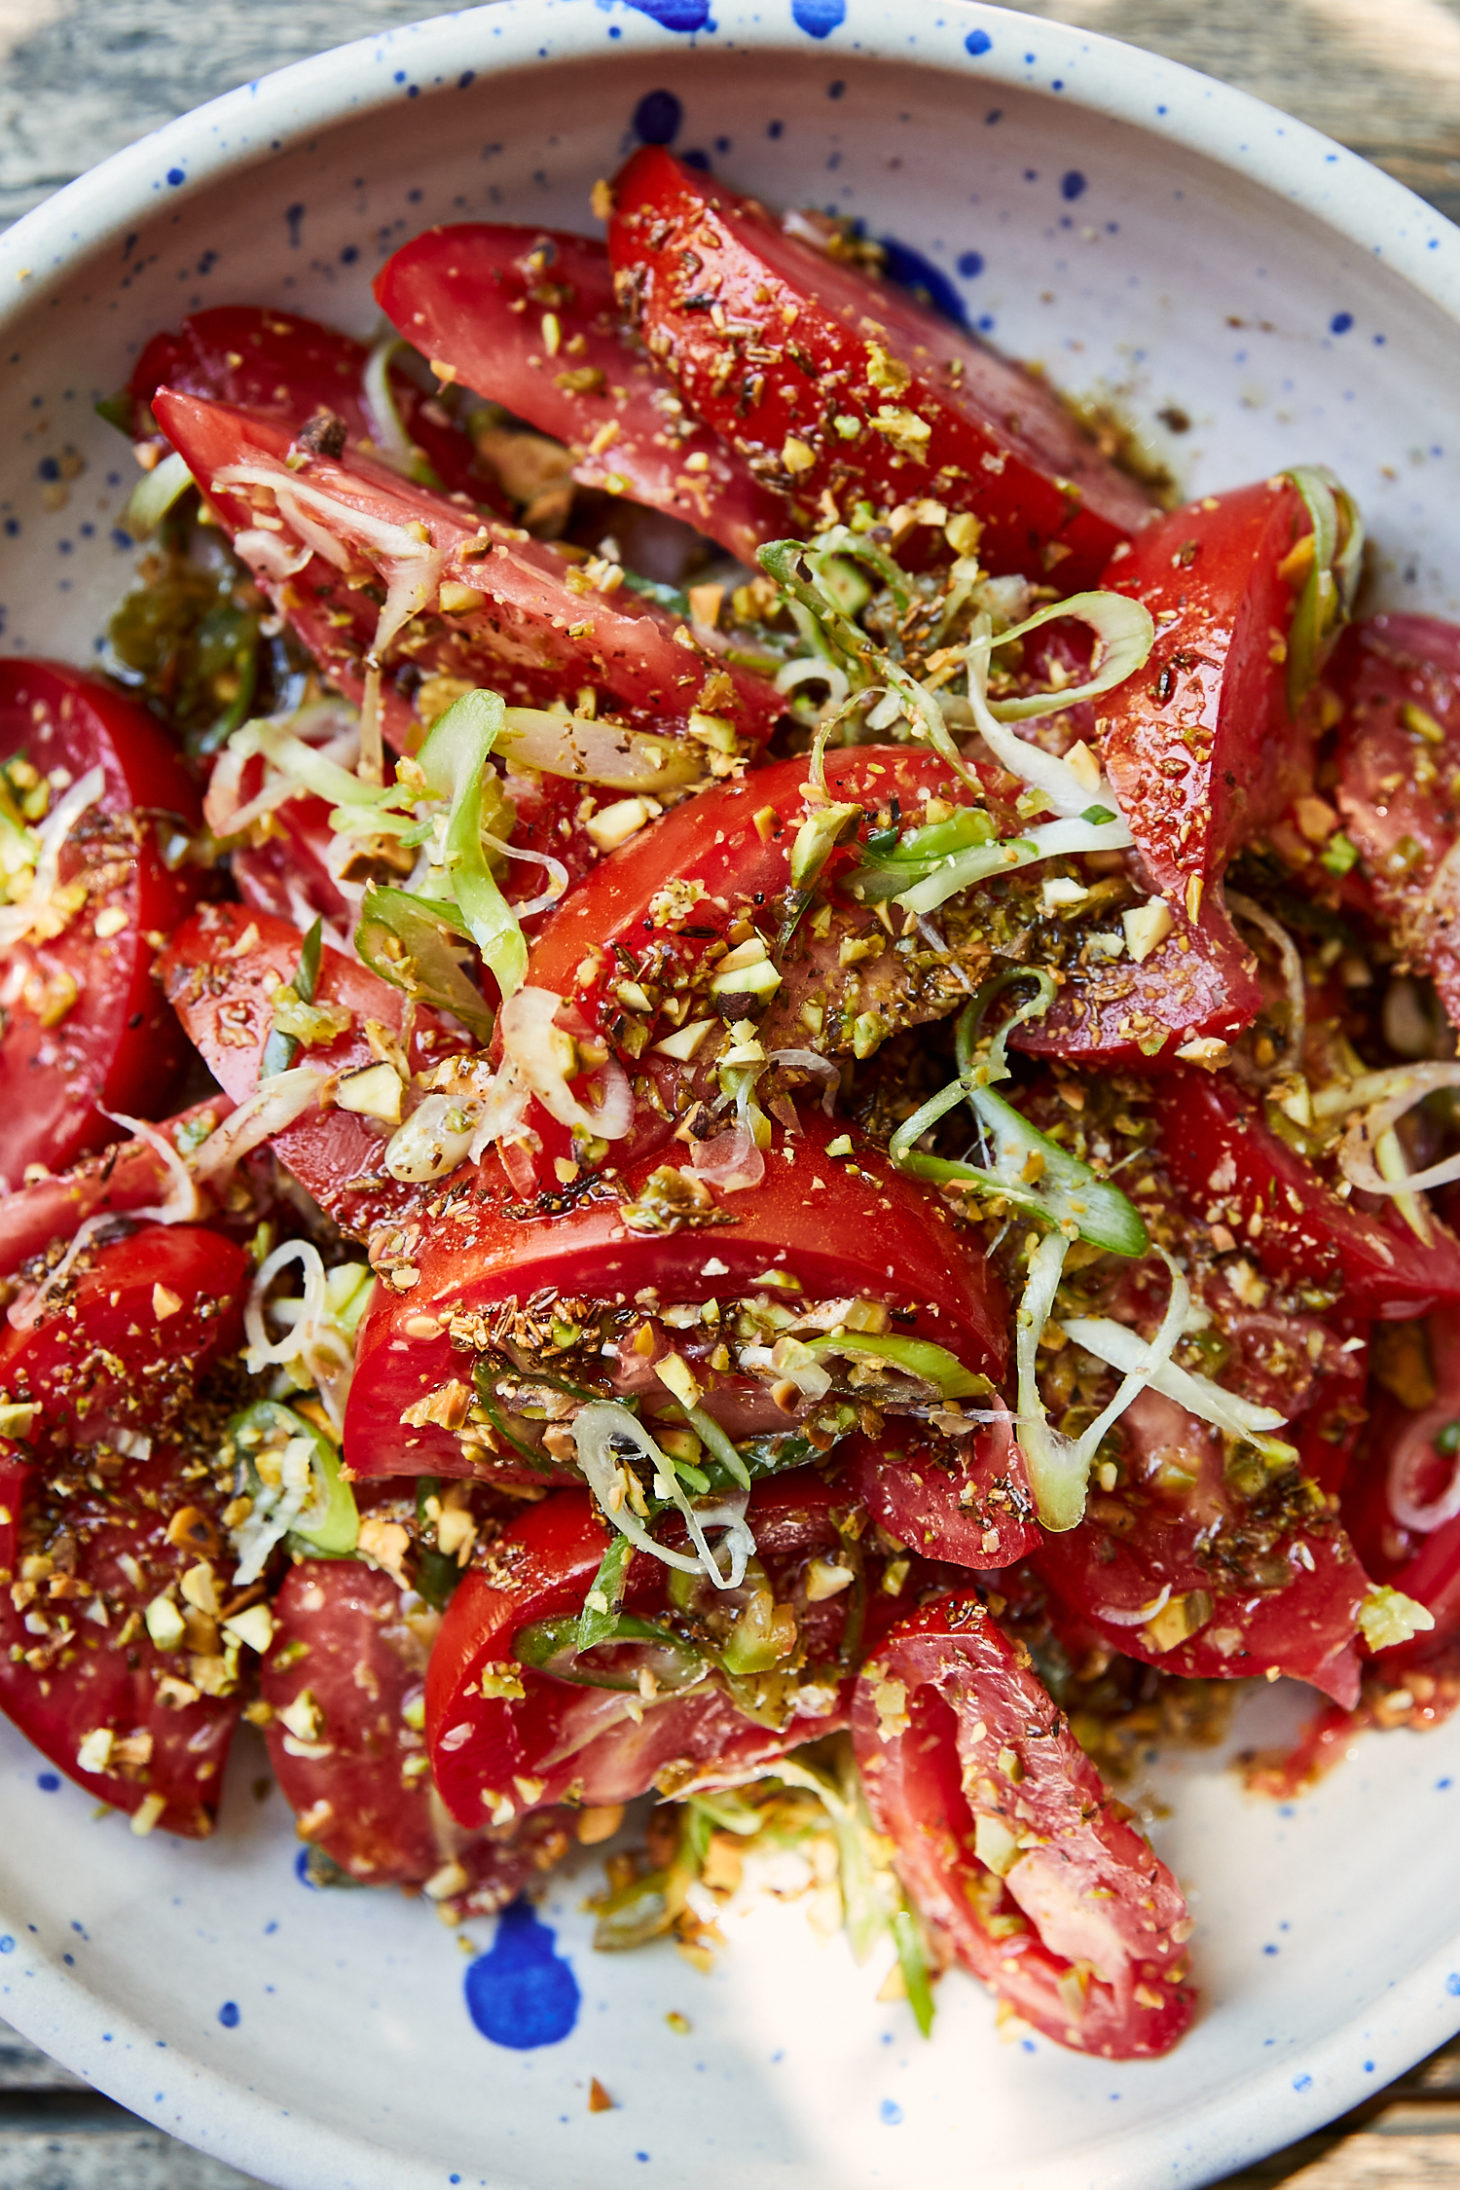 Tomatoes with Pistachios, Cumin and Scallions